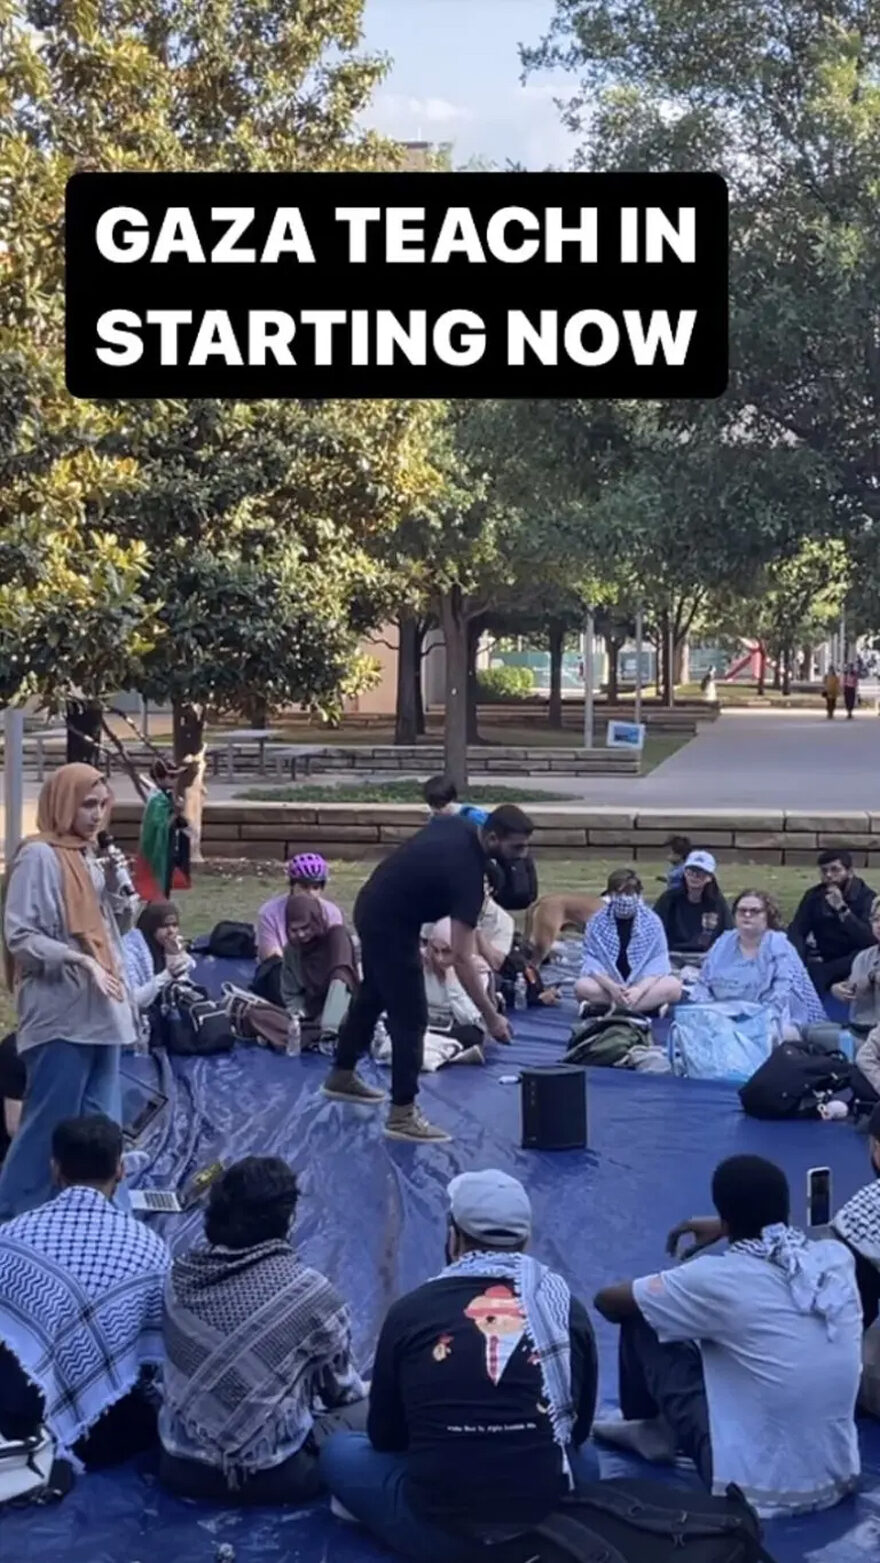 Nidaa Lafi returned to the University of Texas, Dallas, campus Wednesday to lead a “teach-in” at the Students for Justice in Palestine’s occupation of the college lawn. She is paid as a “fellow” by a group backed by George Soros.